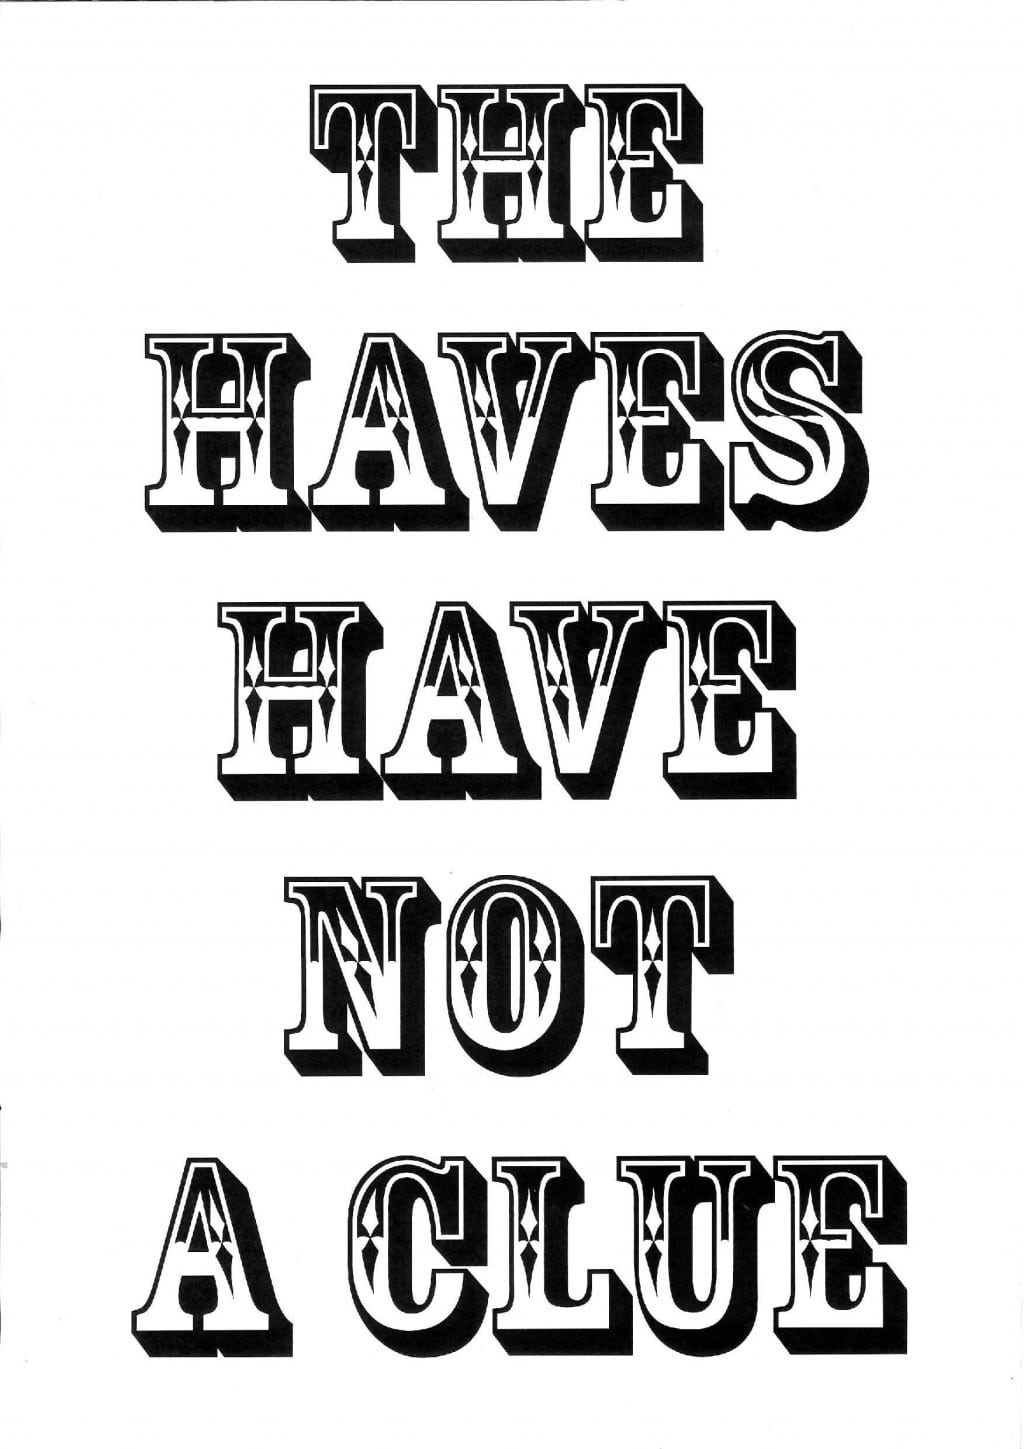 Fly poster for Dead Dog in a Suitcase. Text based image. Black, vintage style lettering on a white background. Contains the words 'The haves have not got a clue' written in capital letters, arranged in five lines of text.